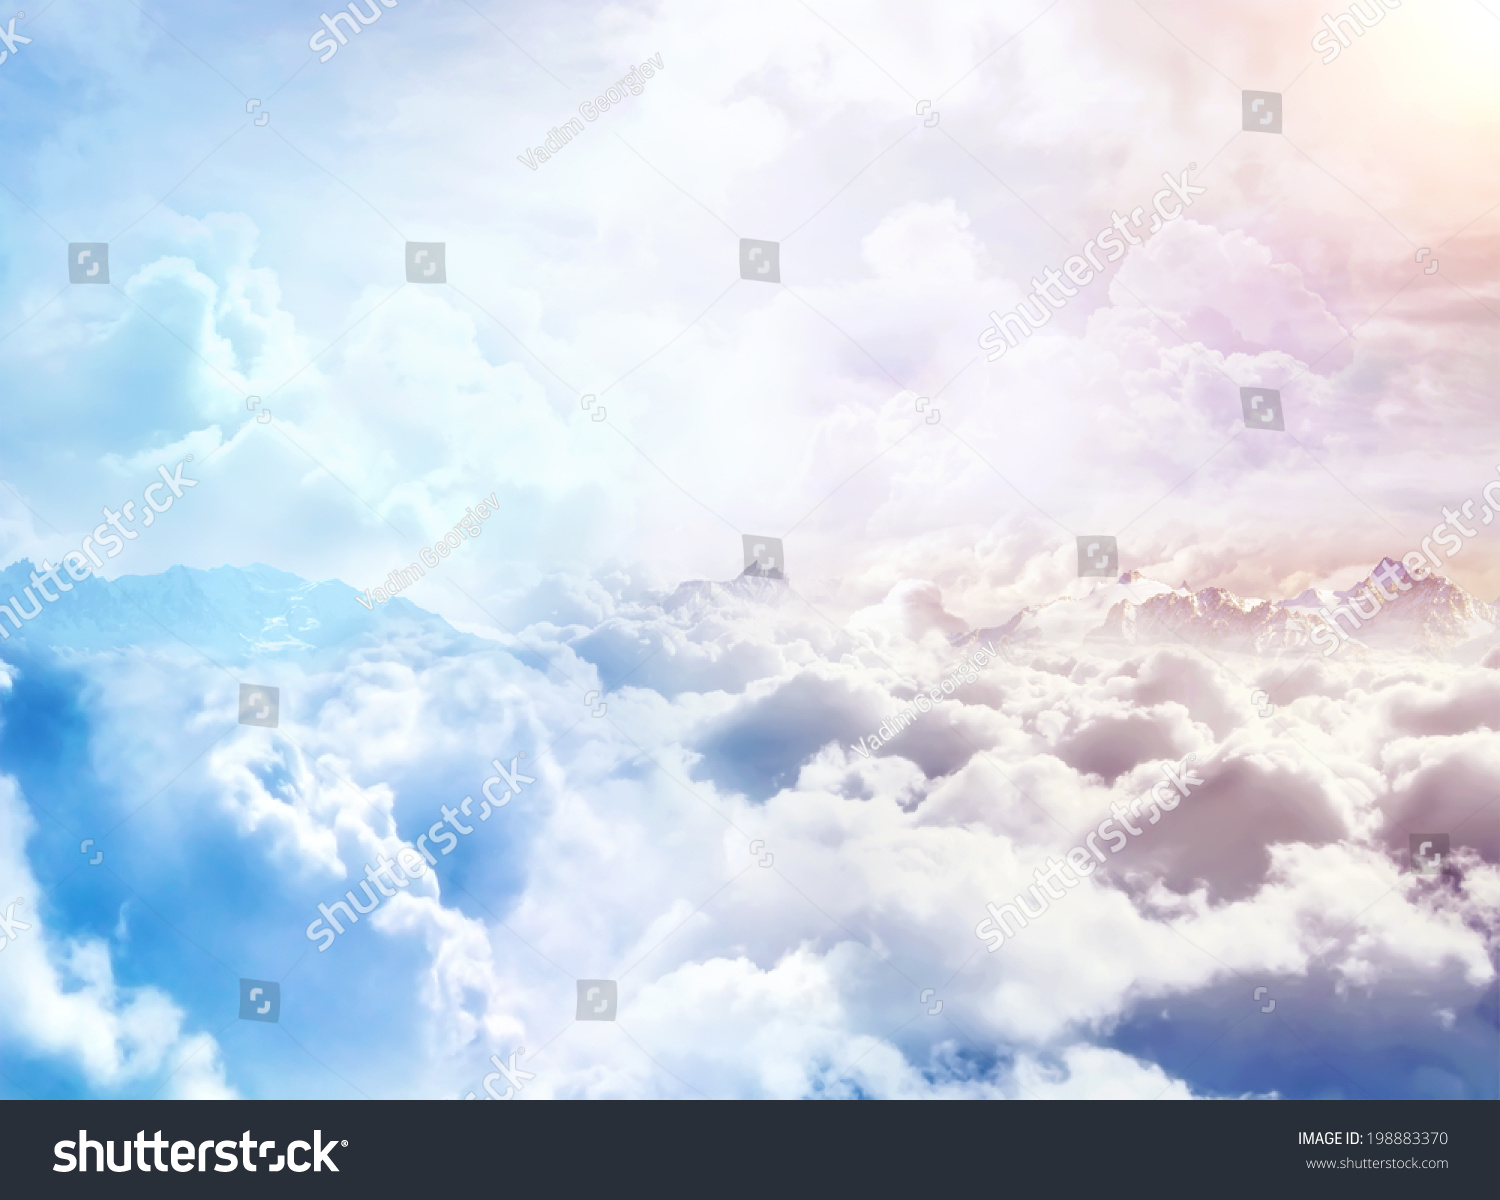 Over the Clouds. Fantastic background with clouds and mountain peaks #198883370